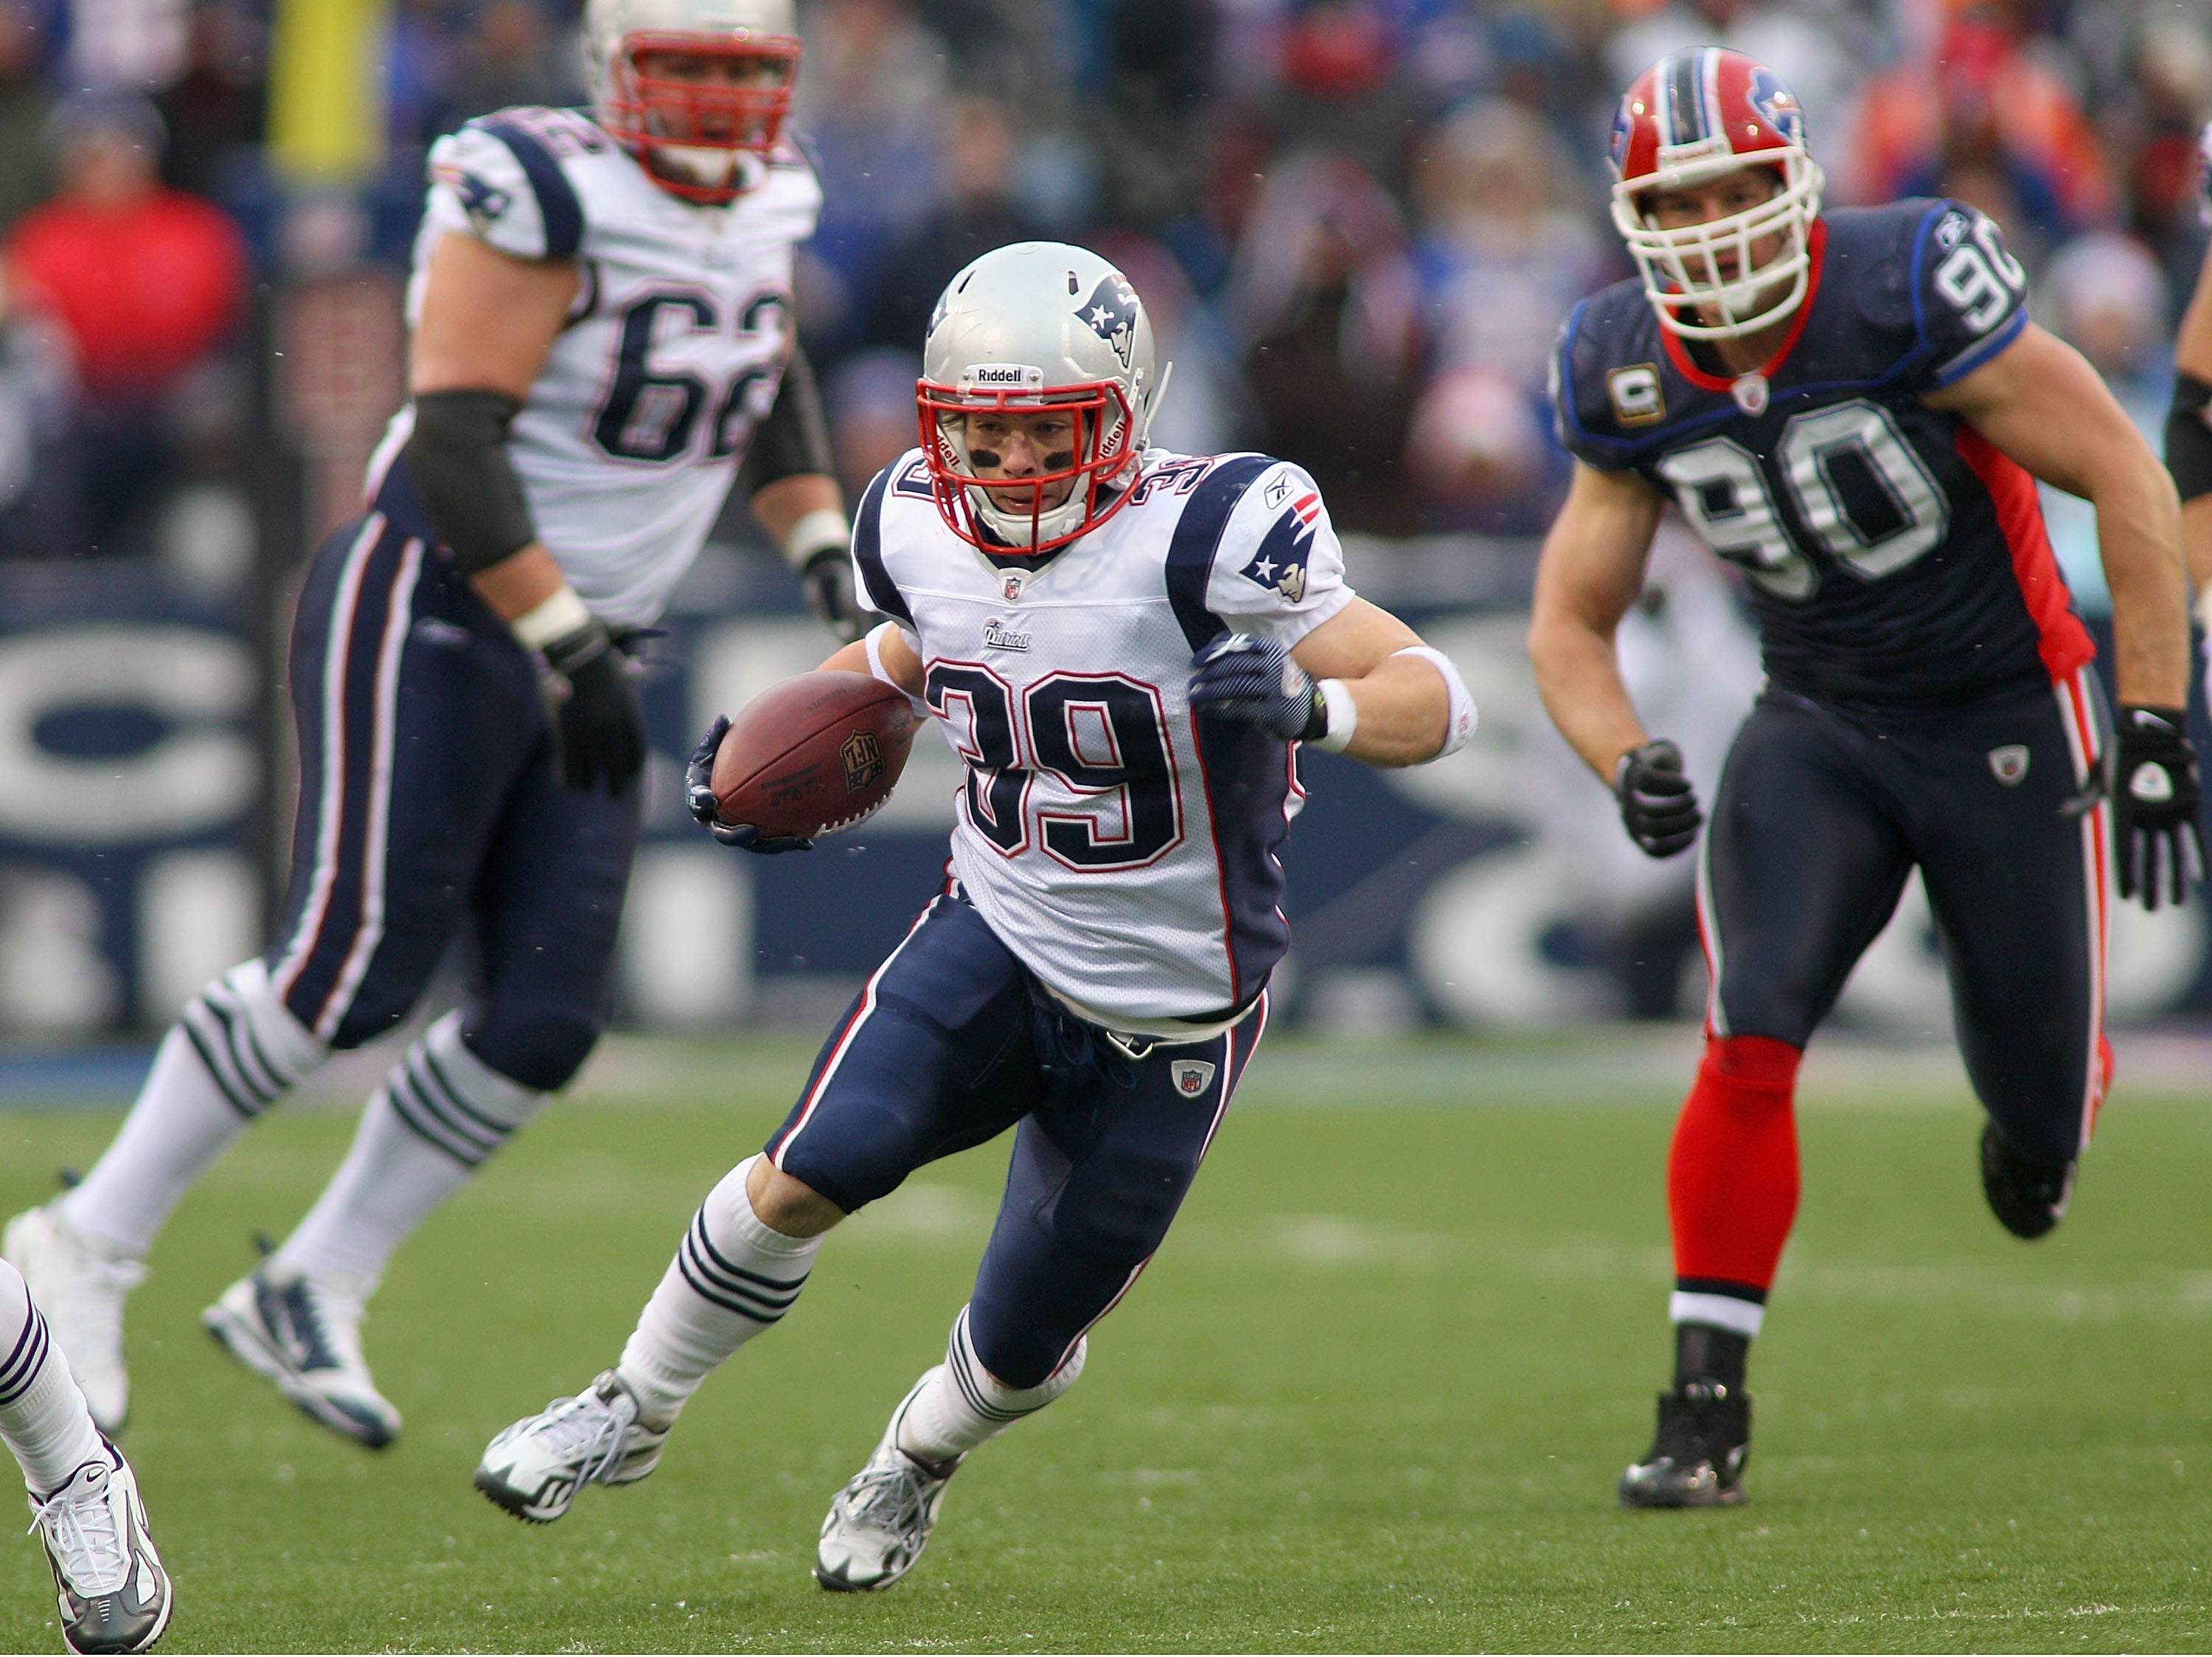 ORCHARD PARK, NY - DECEMBER 26:  Danny Woodhead #39 of the New England Patriots runs against the Buffalo Bills  at Ralph Wilson Stadium on December 26, 2010 in Orchard Park, New York. New England won 34-3. (Photo by Rick Stewart/Getty Images)